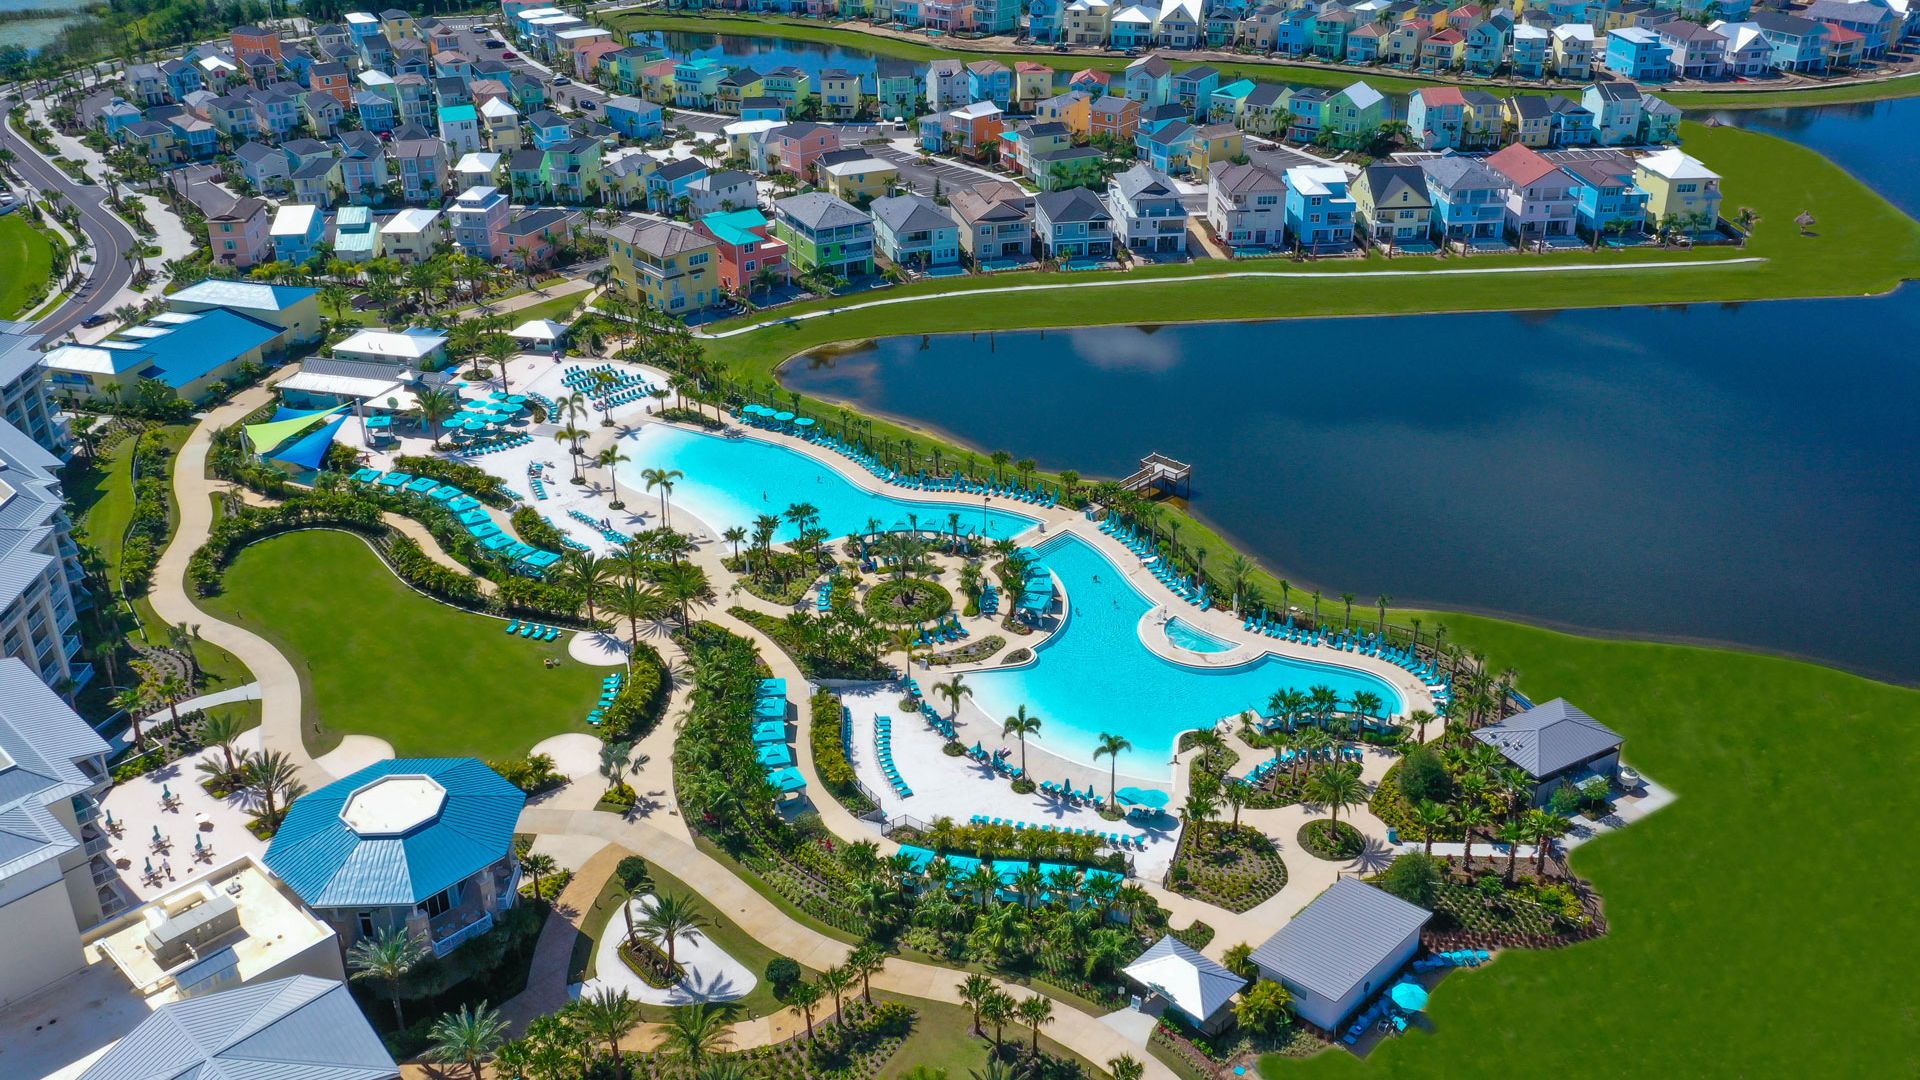 Aerial view of Margaritaville Resort Orlando hotel and cottages.